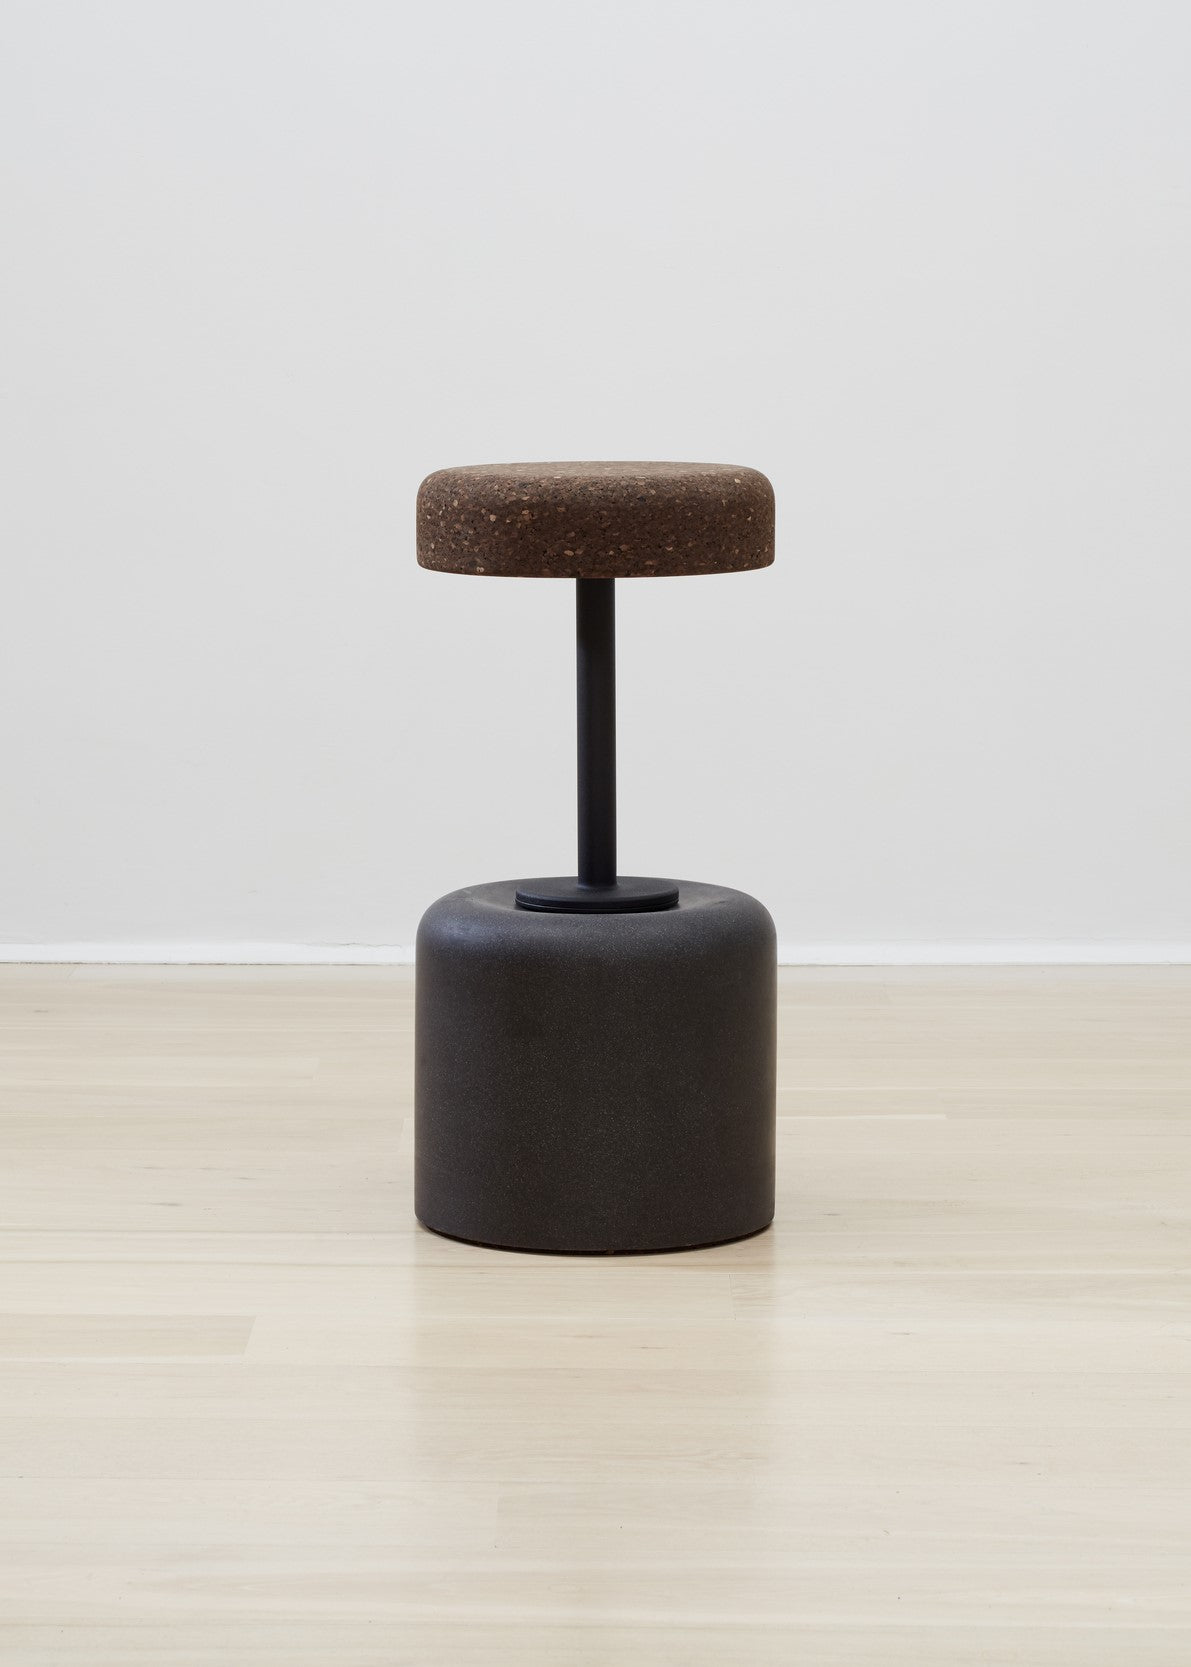 Luxurious Kanju Wiid Design Cork Swivel Counter & Bar Stool, featuring a sleek charcoal grey finish, combines contemporary elegance with African craftsmanship, ideal for upscale home decor enthusiasts.